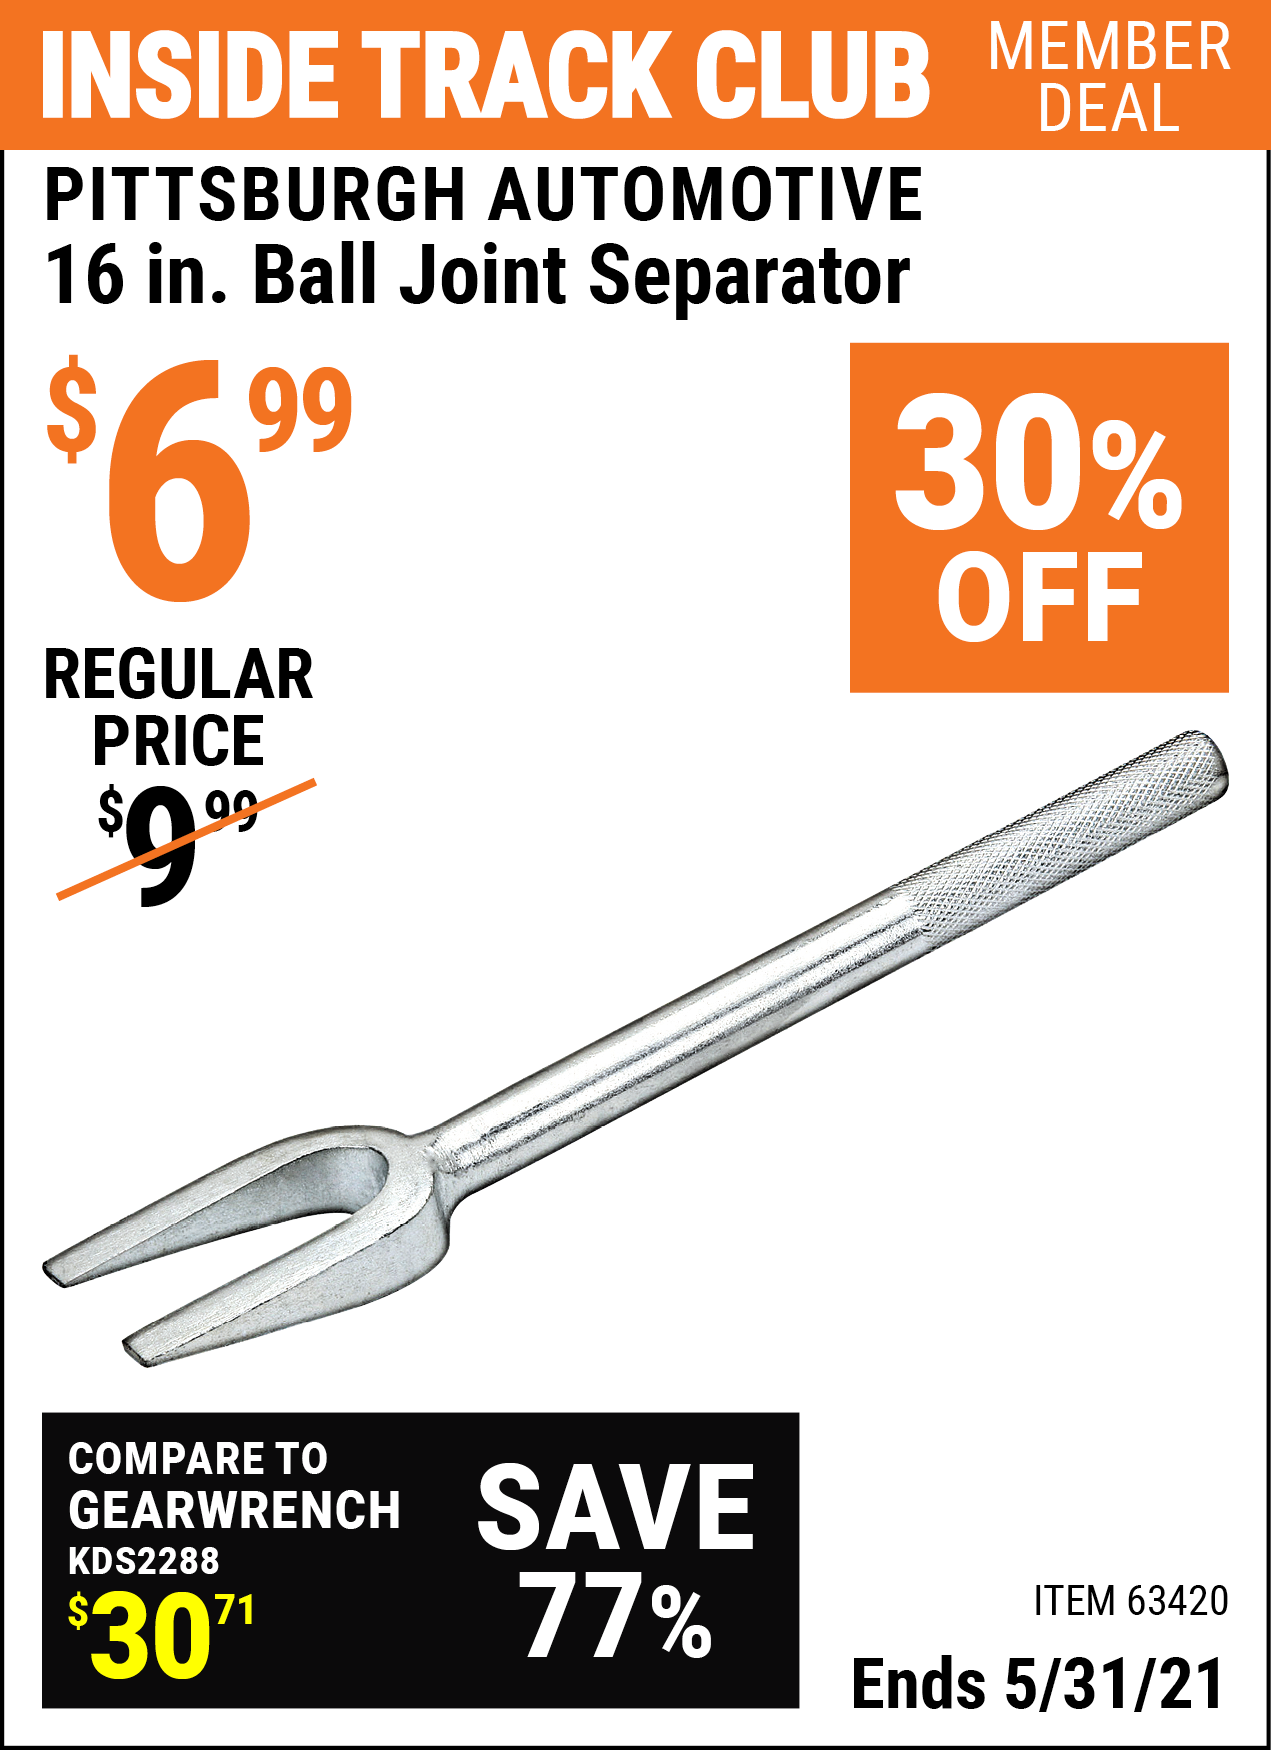 Inside Track Club members can buy the PITTSBURGH AUTOMOTIVE 16 in. Ball Joint Separator (Item 63420) for $6.99, valid through 5/31/2021.